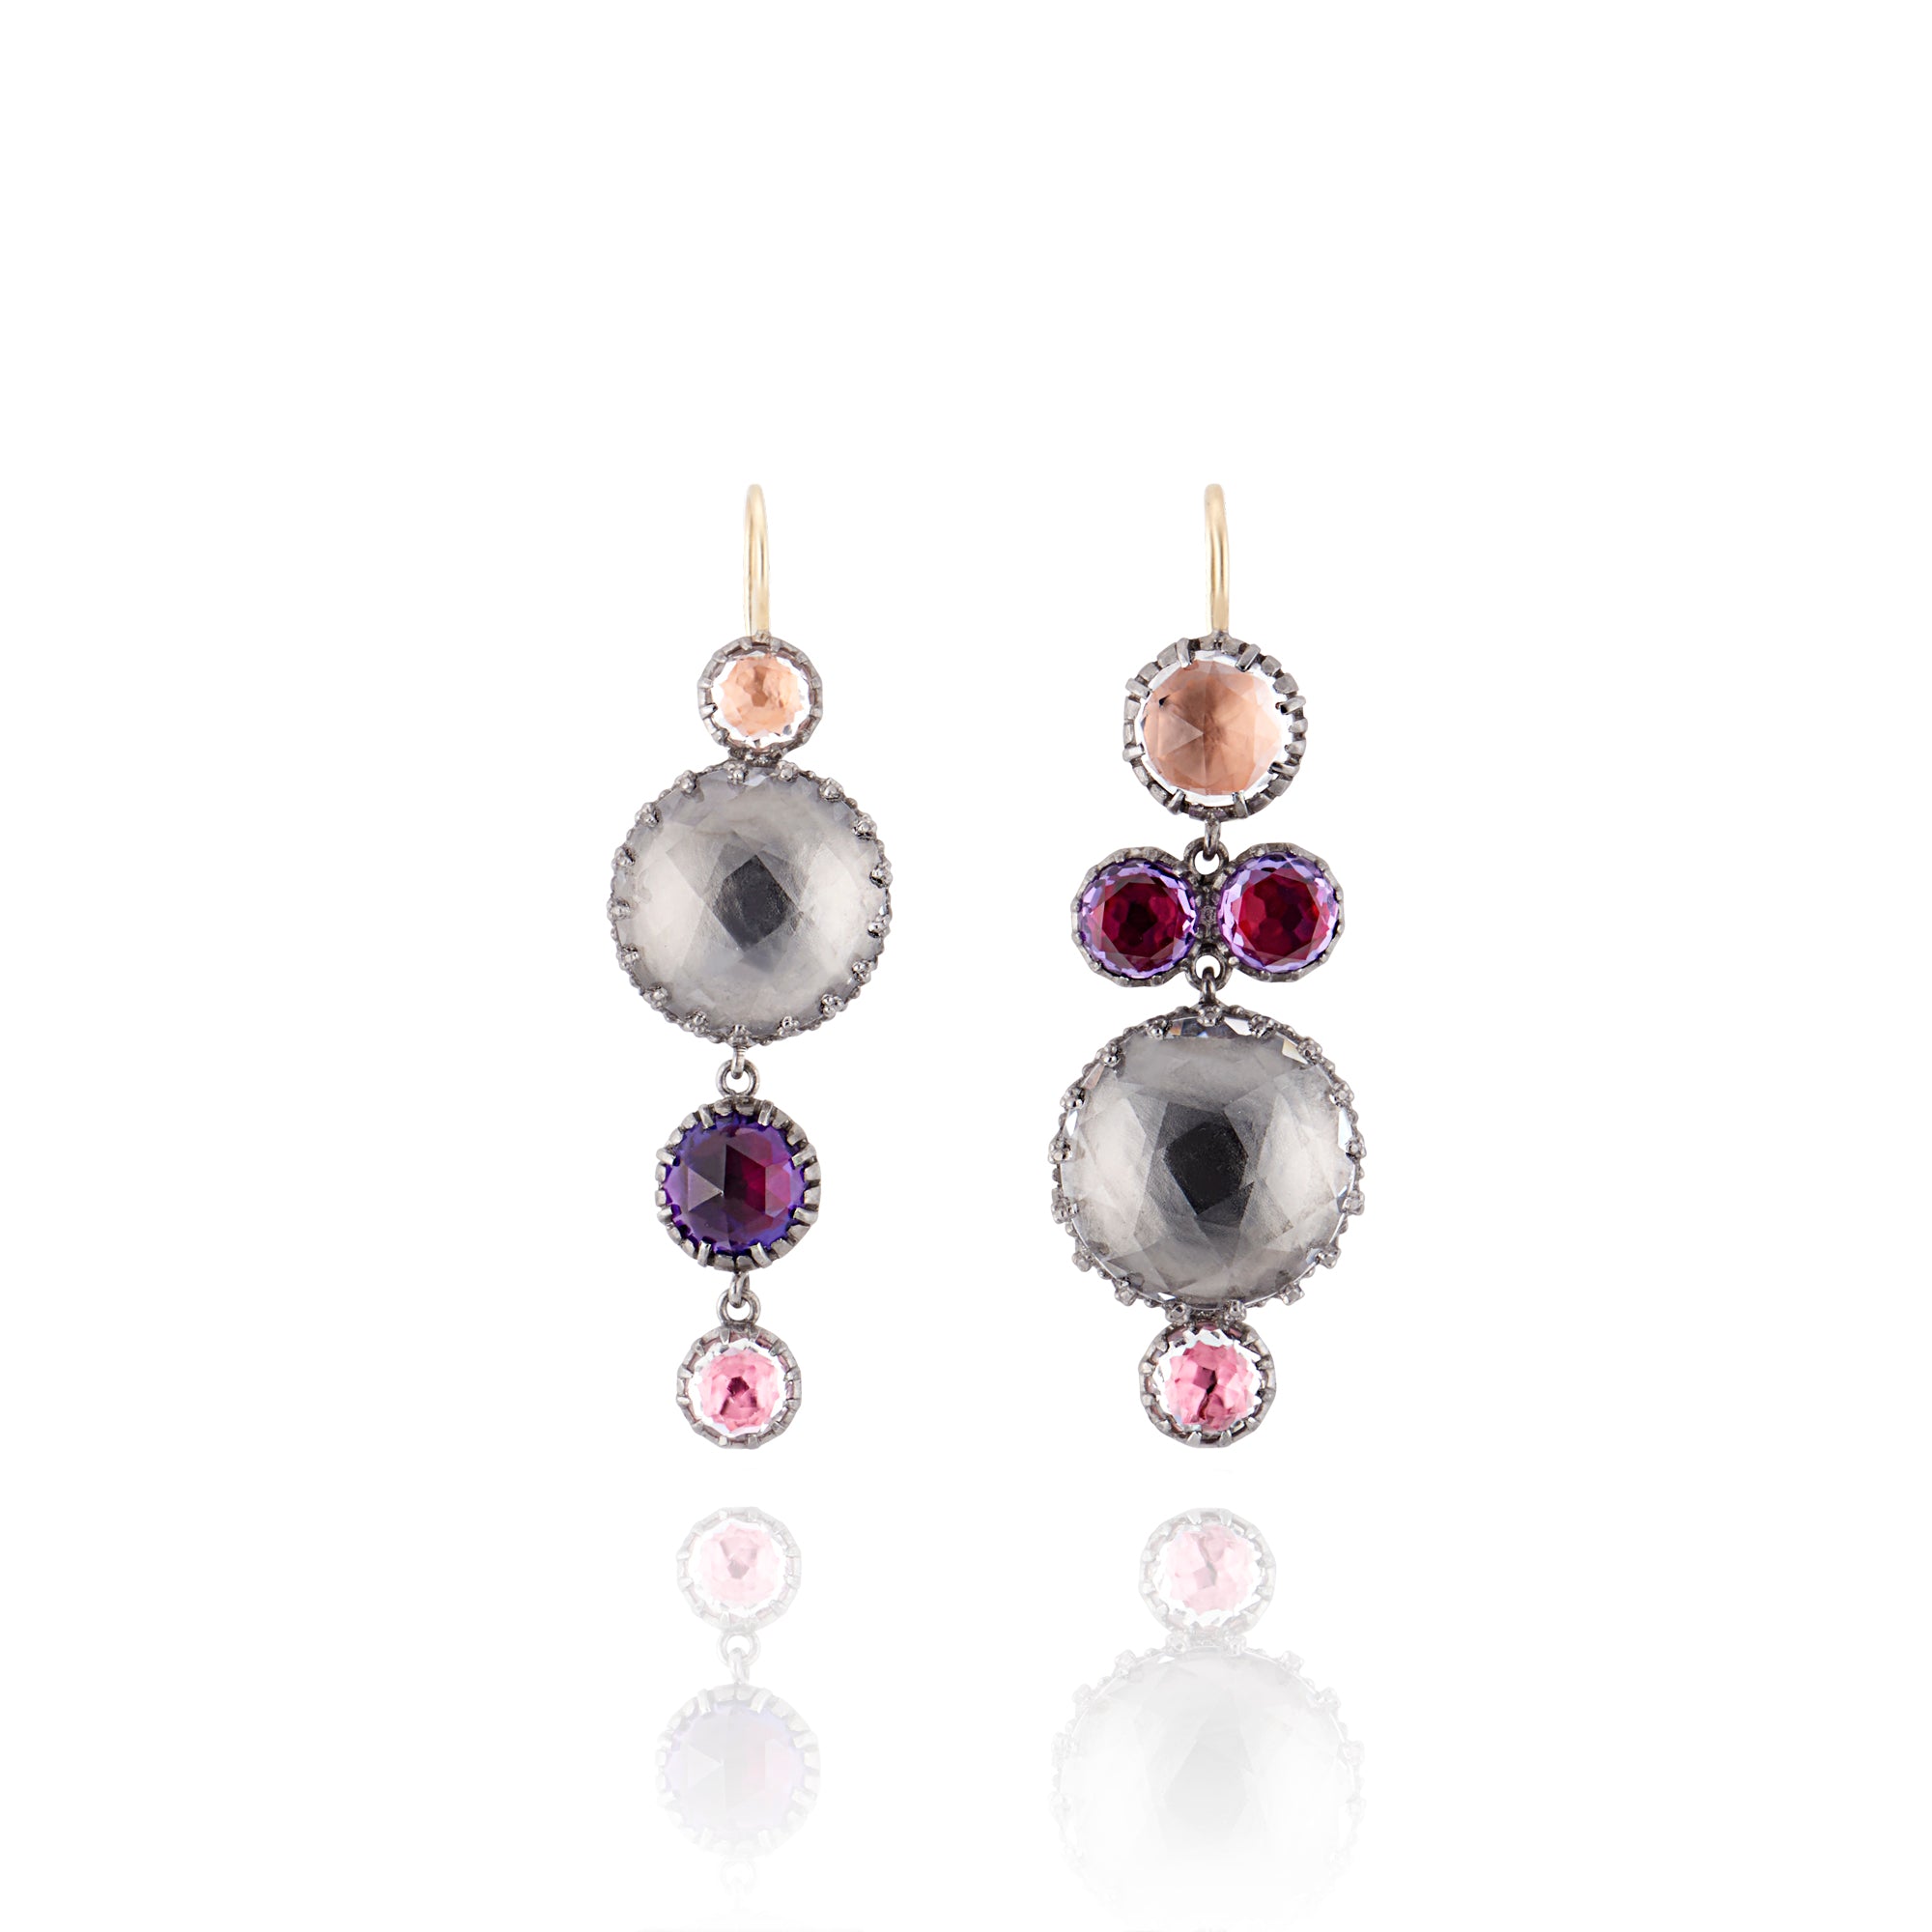 Sadie Mis-Matched Bubble Earrings (Black Rhodium or Rose Gold Wash)